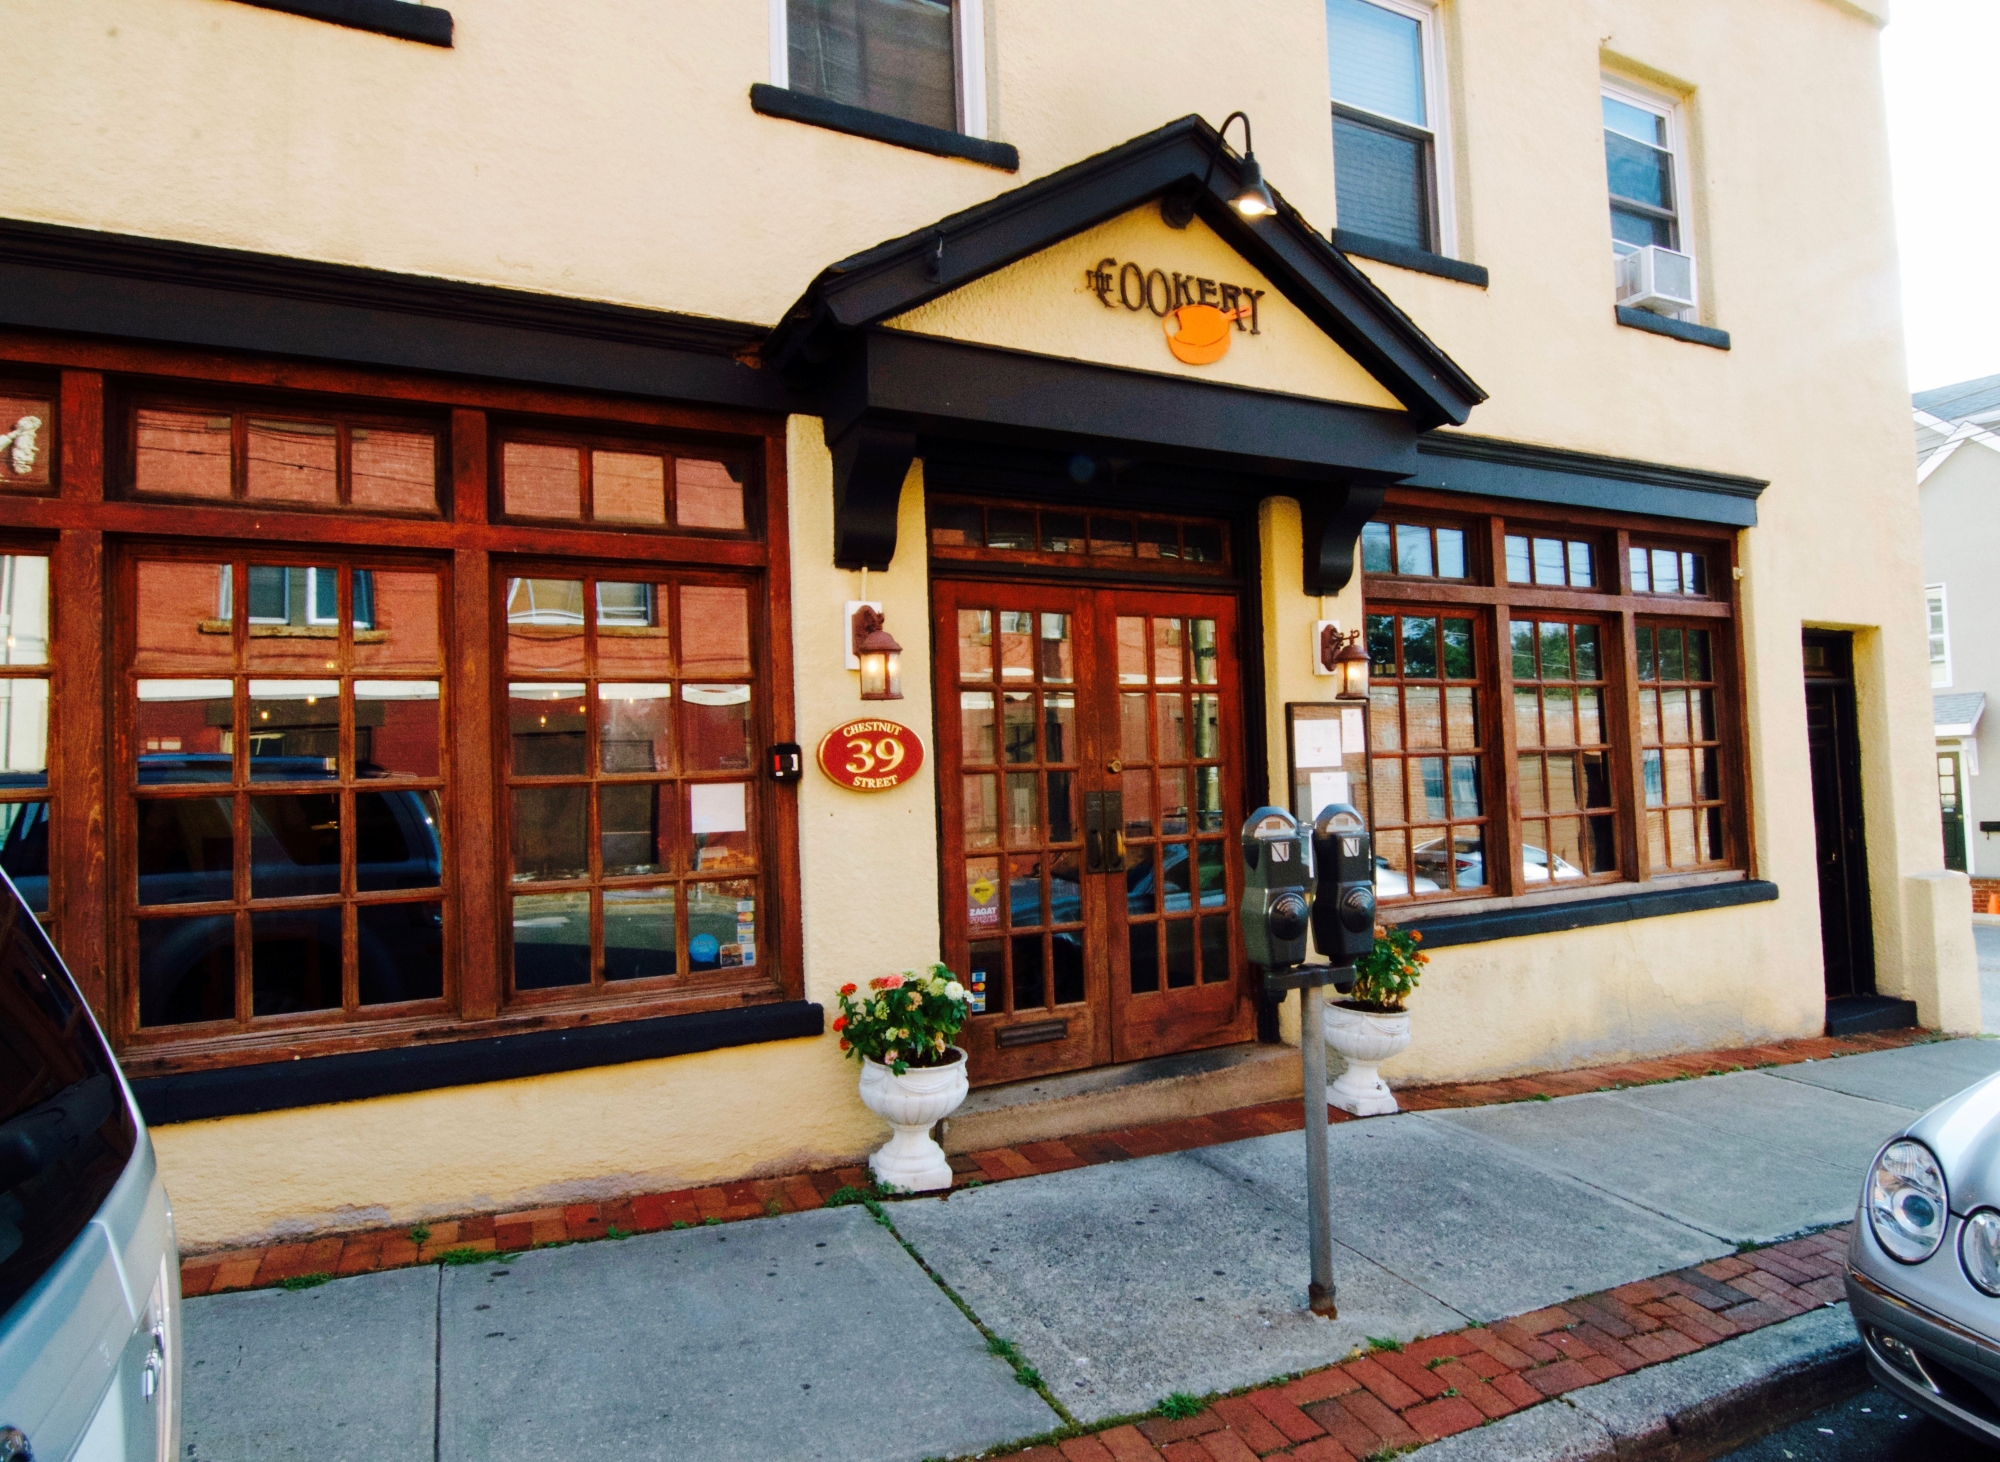 The Cookery in Dobbs Ferry in Westchester County New York